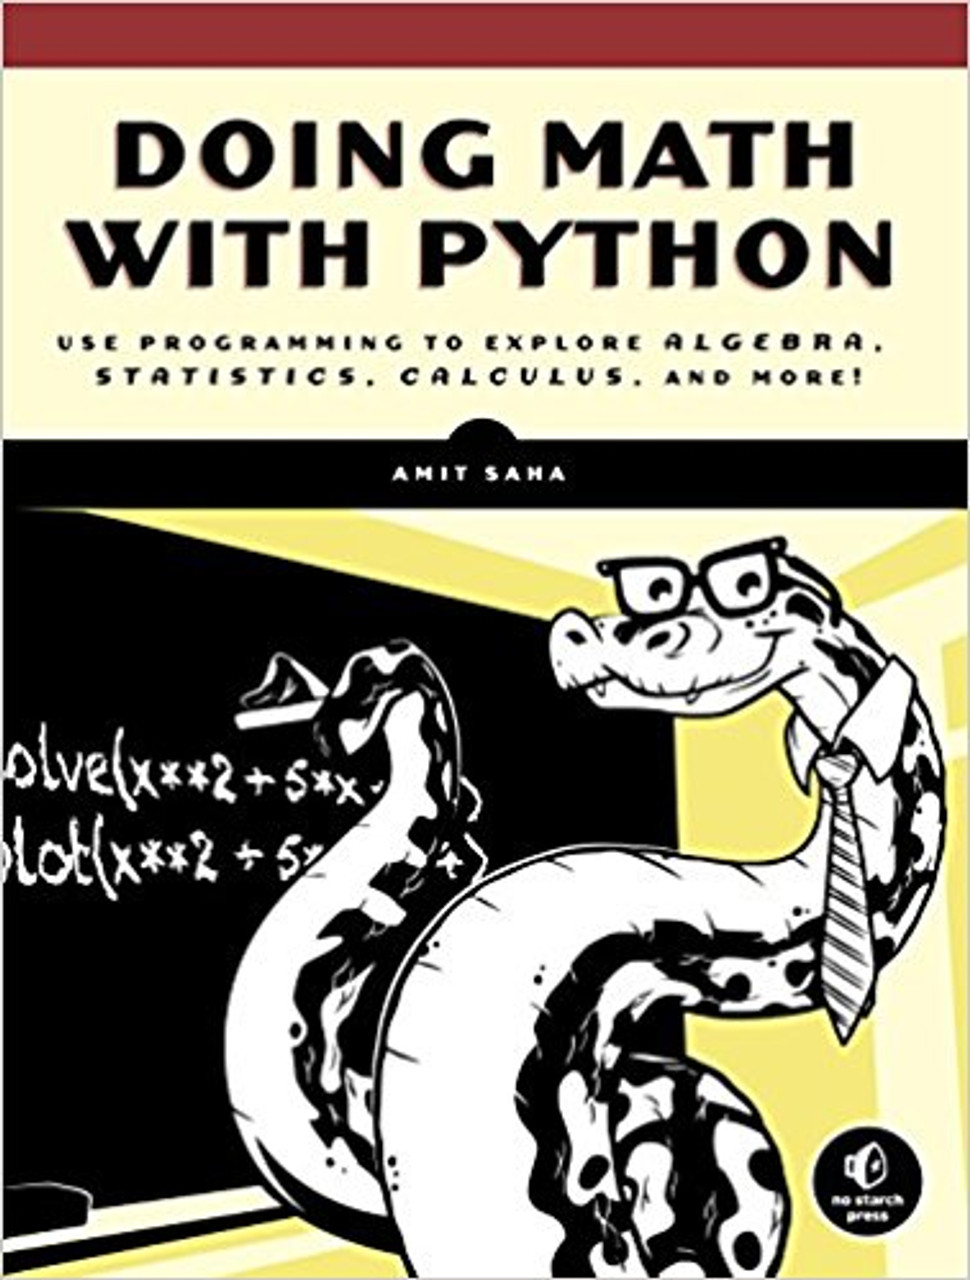 Uses the Python programming language as a tool to explore high school level mathematics like statistics, geometry, probability, and calculus by writing programs to find derivatives, solve equations graphically, manipulate algebraic expressions, and examine projectile motion. Covers programming concepts including using functions, handling user input, and reading and manipulating data